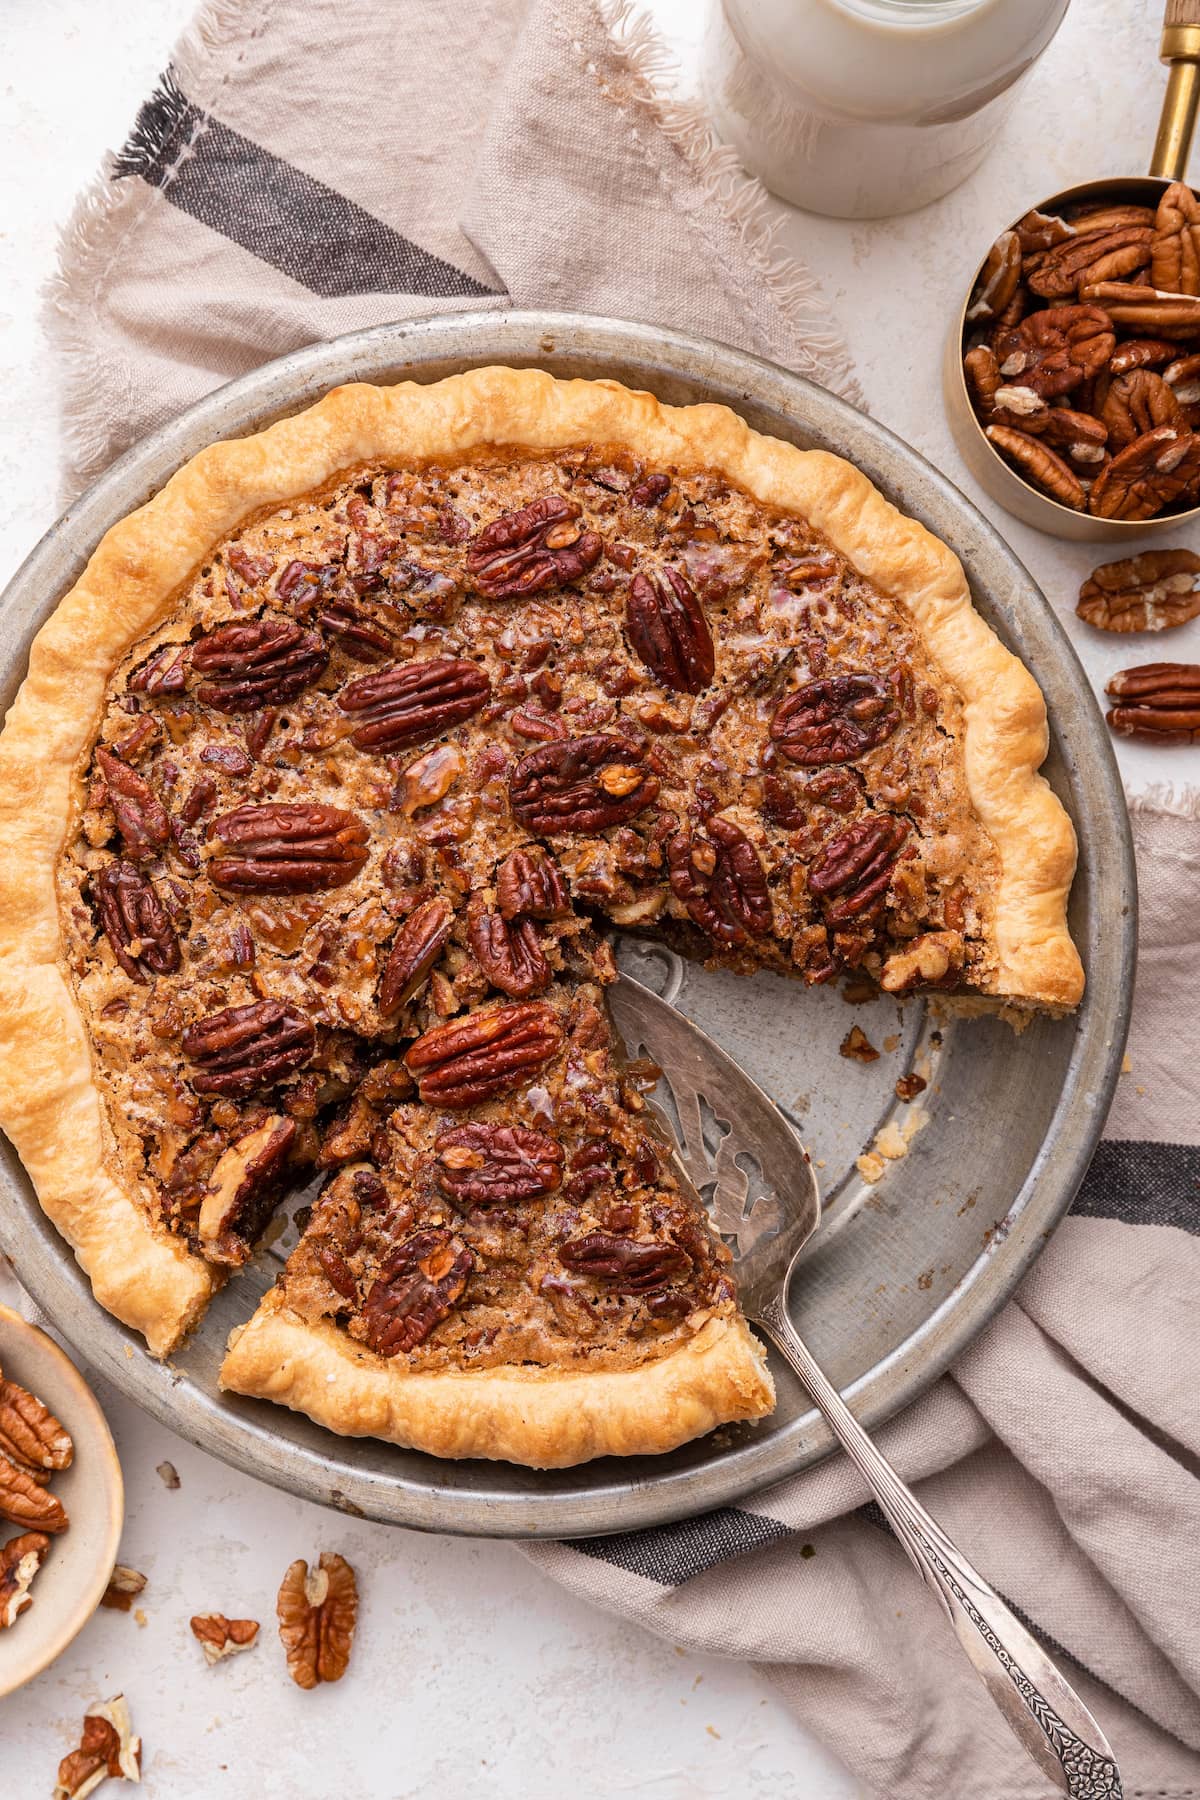 Pecan pie in a pie dish with pecan halves on top. One piece has been removed and a serving utensil is in the pie dish.